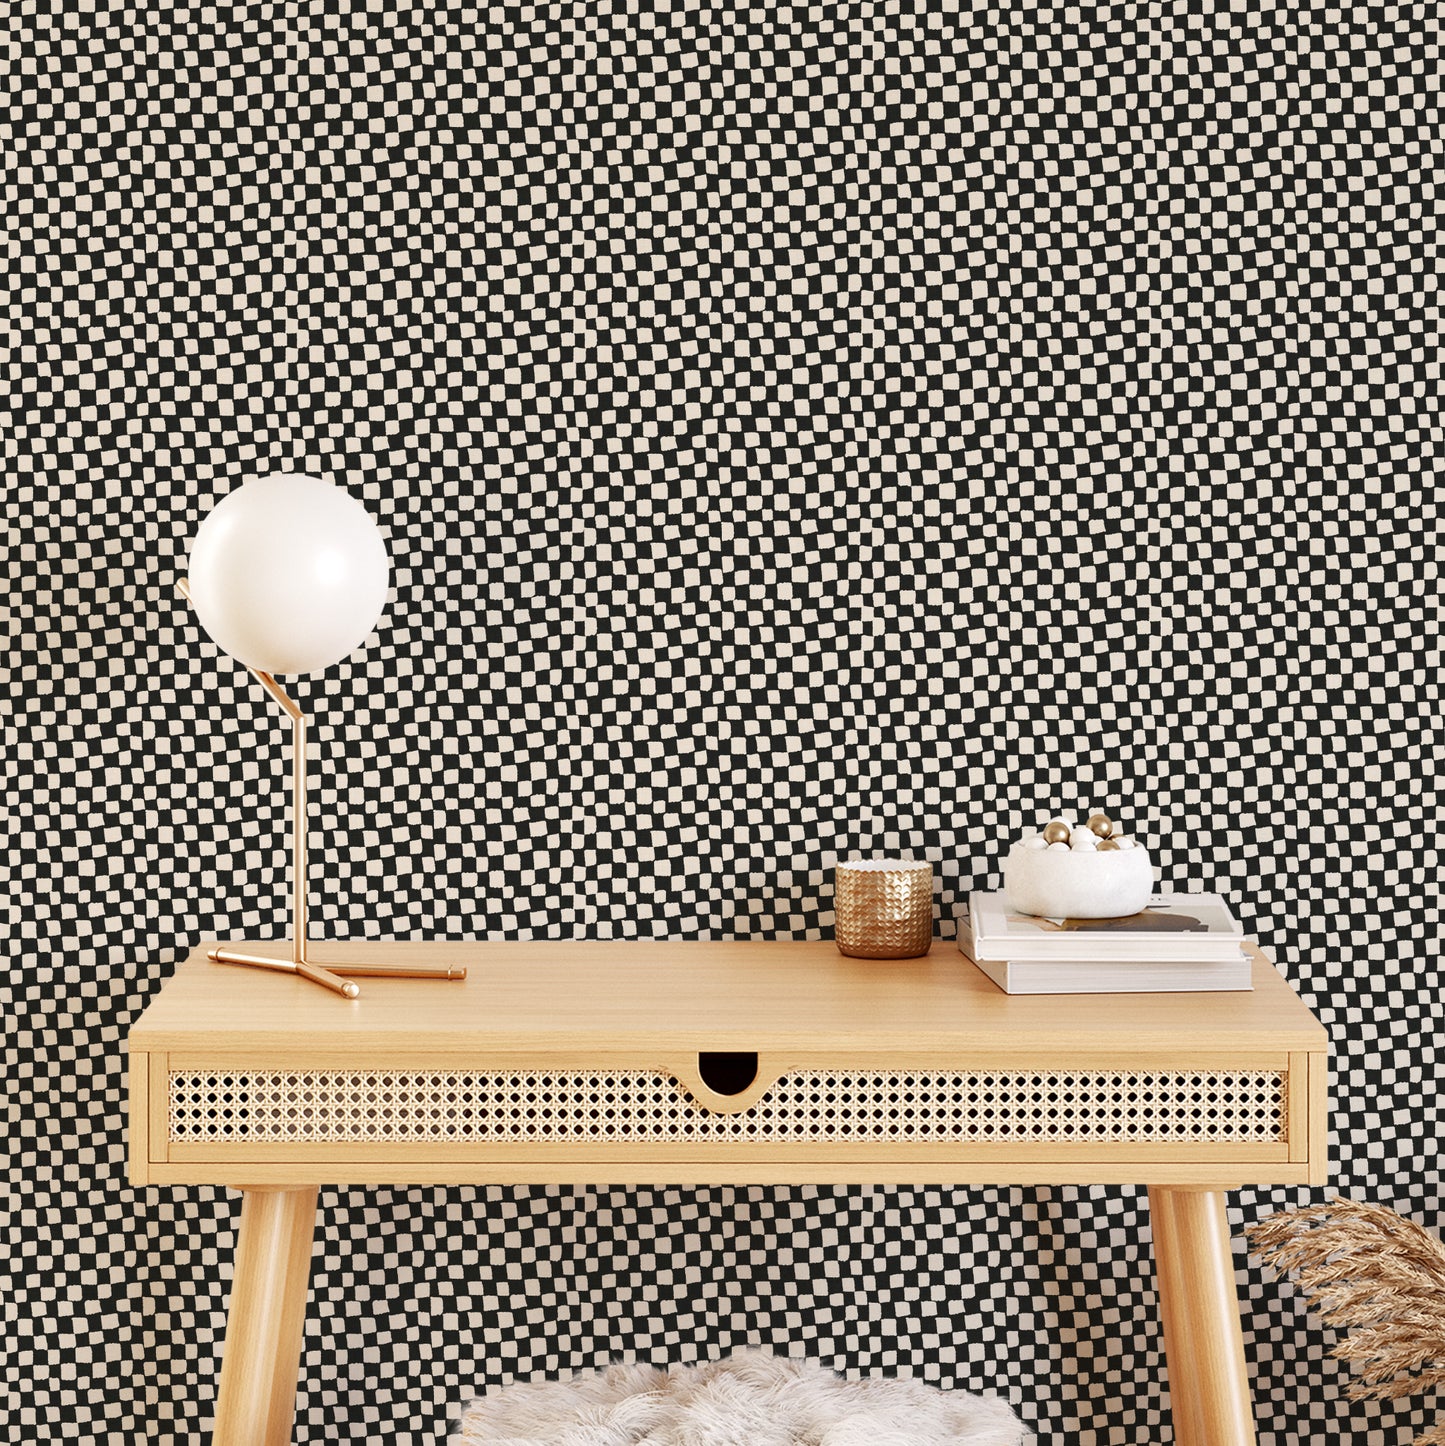 ransform your space with Lazy Checkers Wallpaper – Black. Featuring playful, uneven visuals for a dynamic, three-dimensional look, this wallpaper can bring a sense of movement and energy to any room.